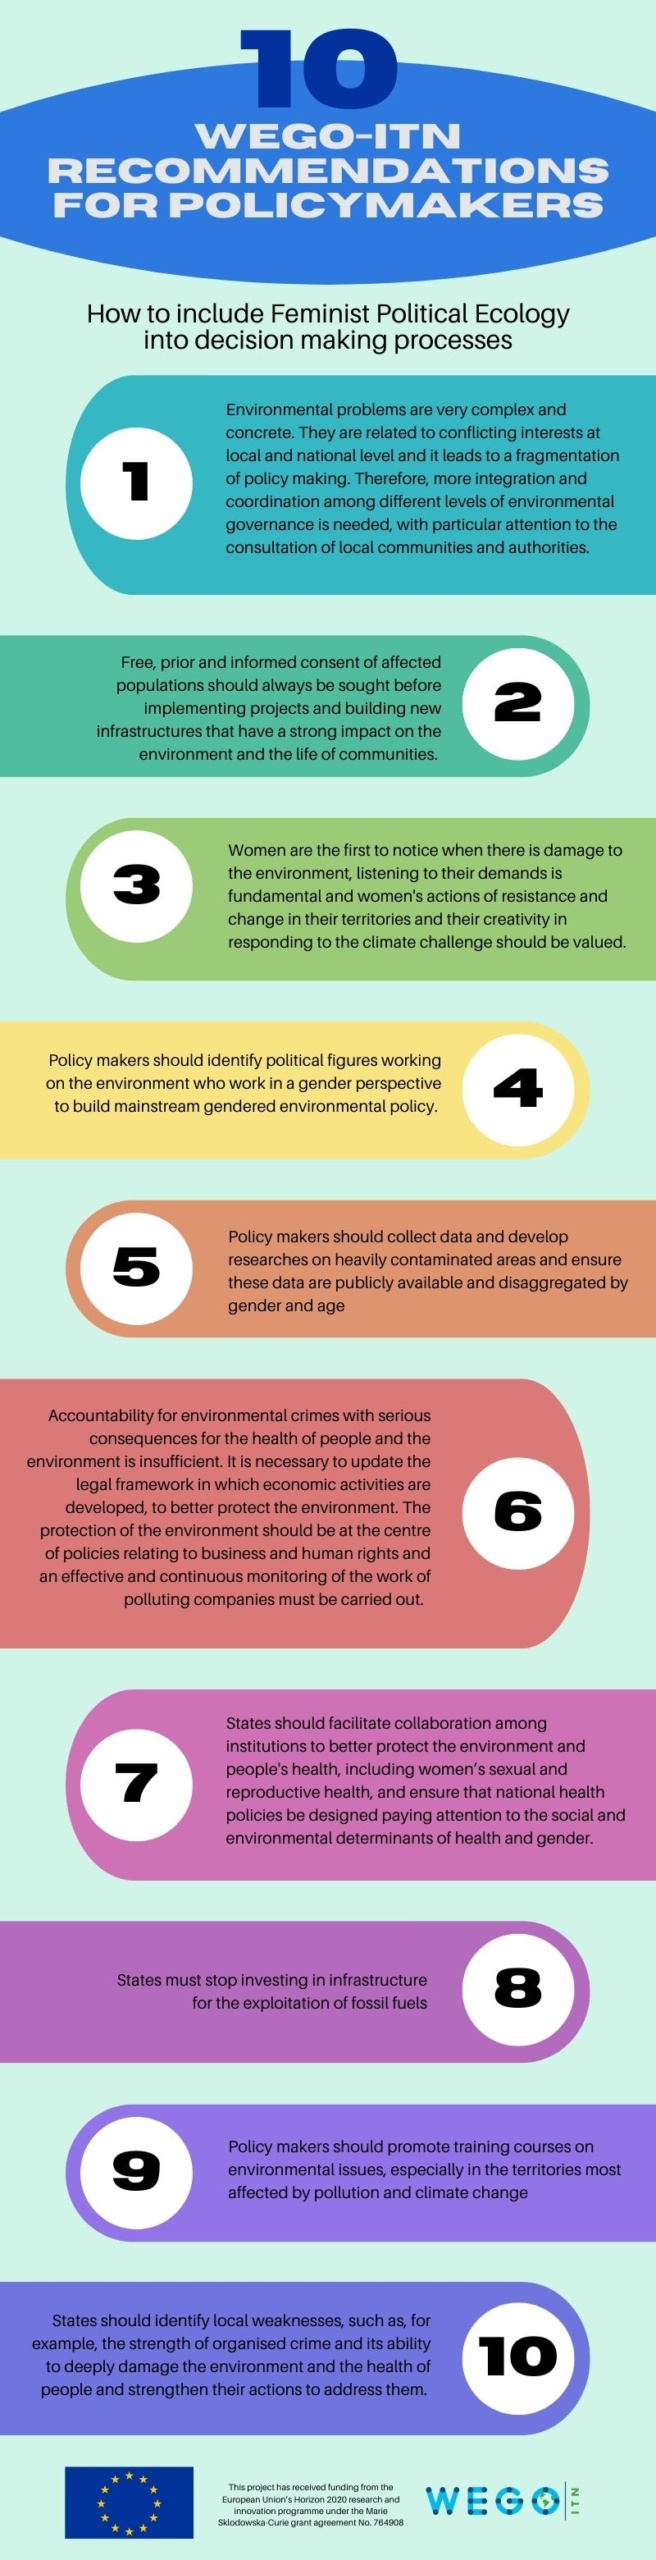 10 recommendations for policymakers working on Feminist Political Ecology